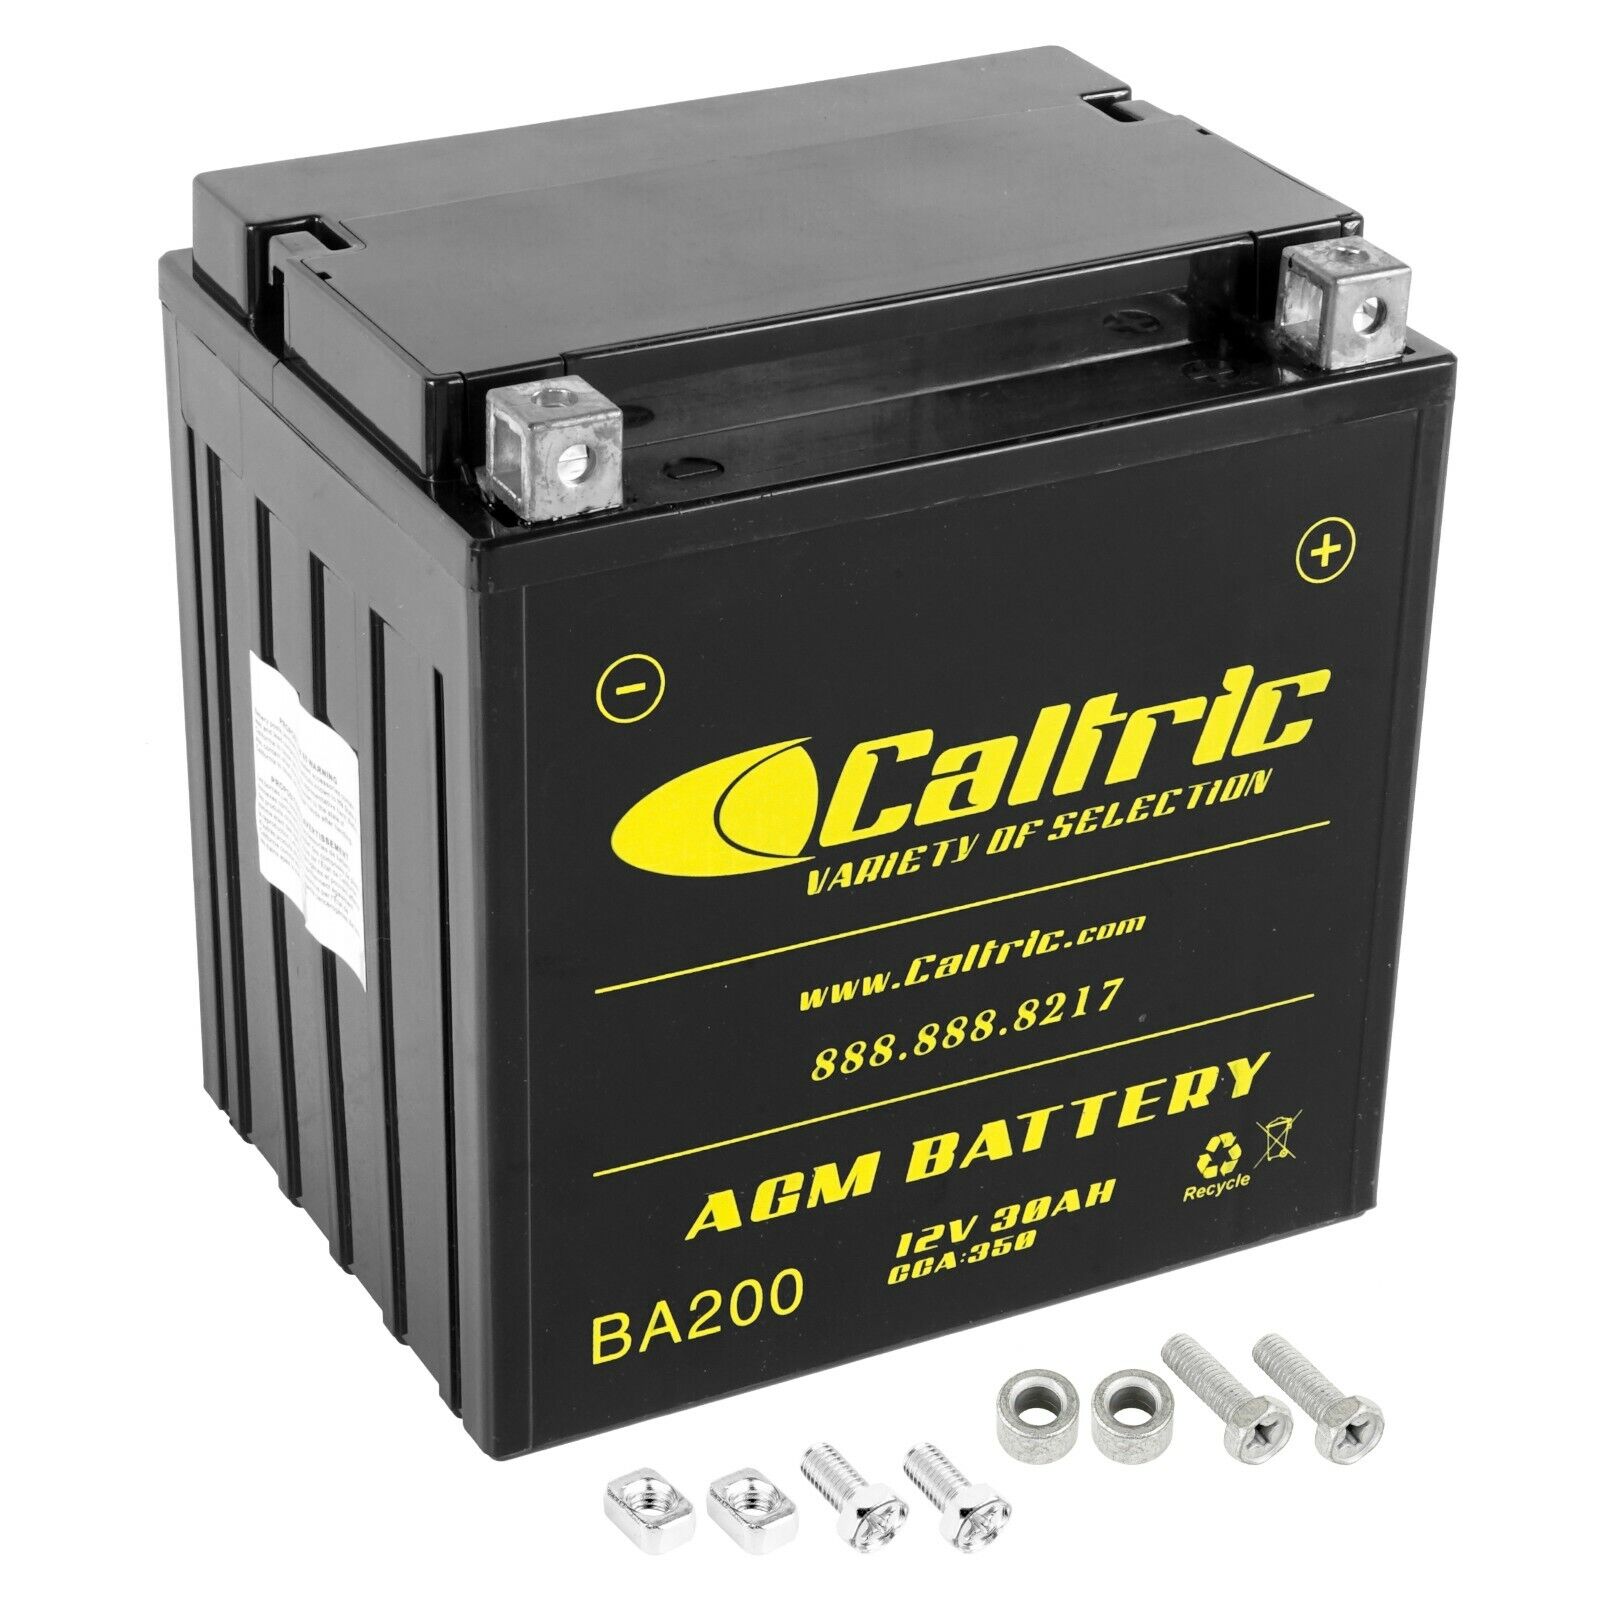 AGM Battery for Harley Davidson Flhtcui Ultra Classic Electra Glide 1997-2006